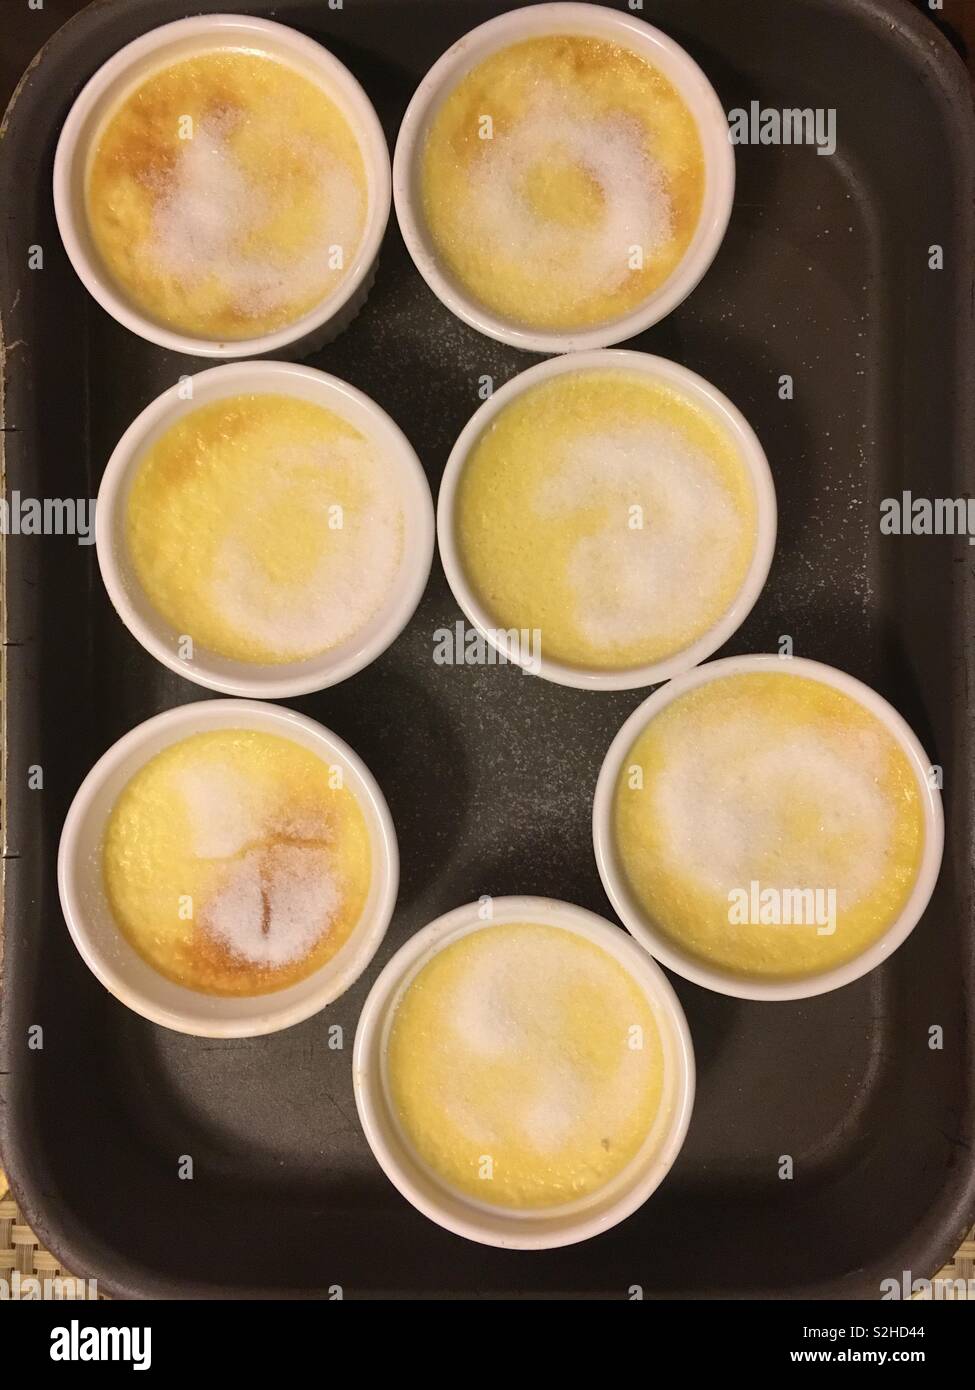 Grandma’s homemade creme brûlée dessert in the little white bowls ready to be torched. Stock Photo